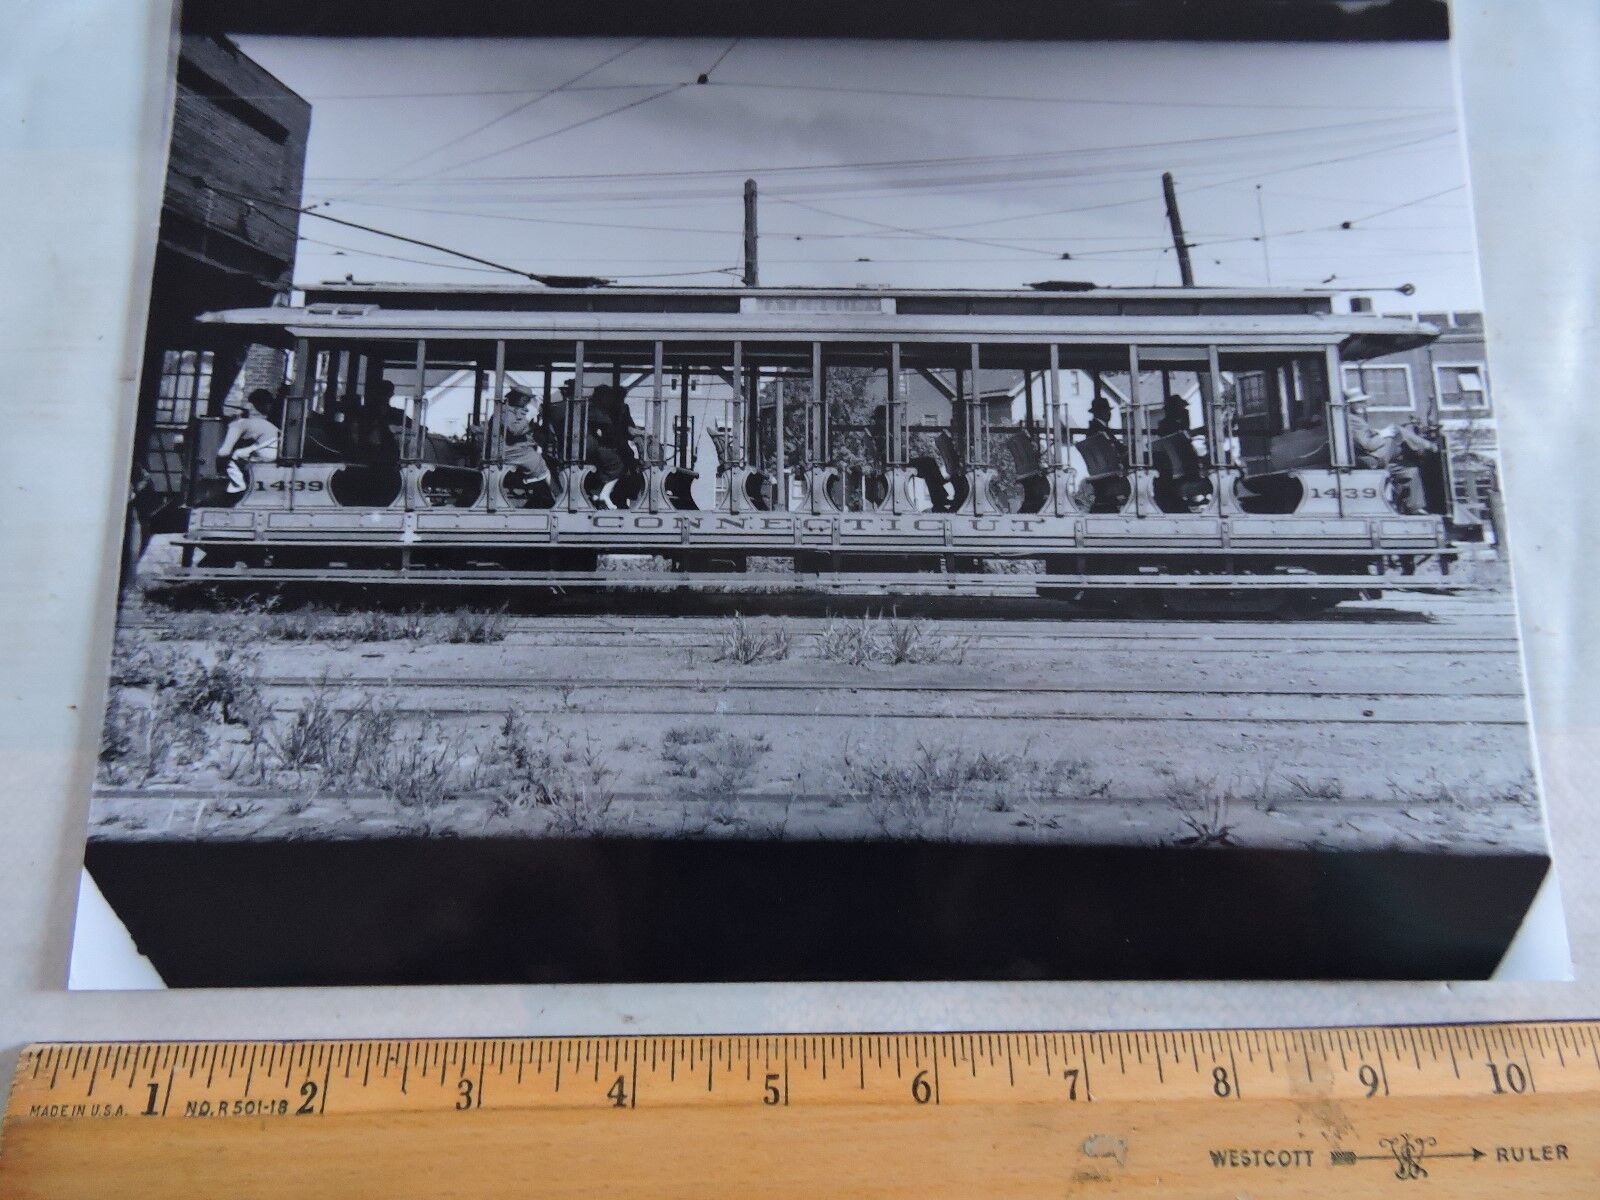 1916 Waterbury CT Connecticut OPEN-AIR TROLLEY Photo Reprint